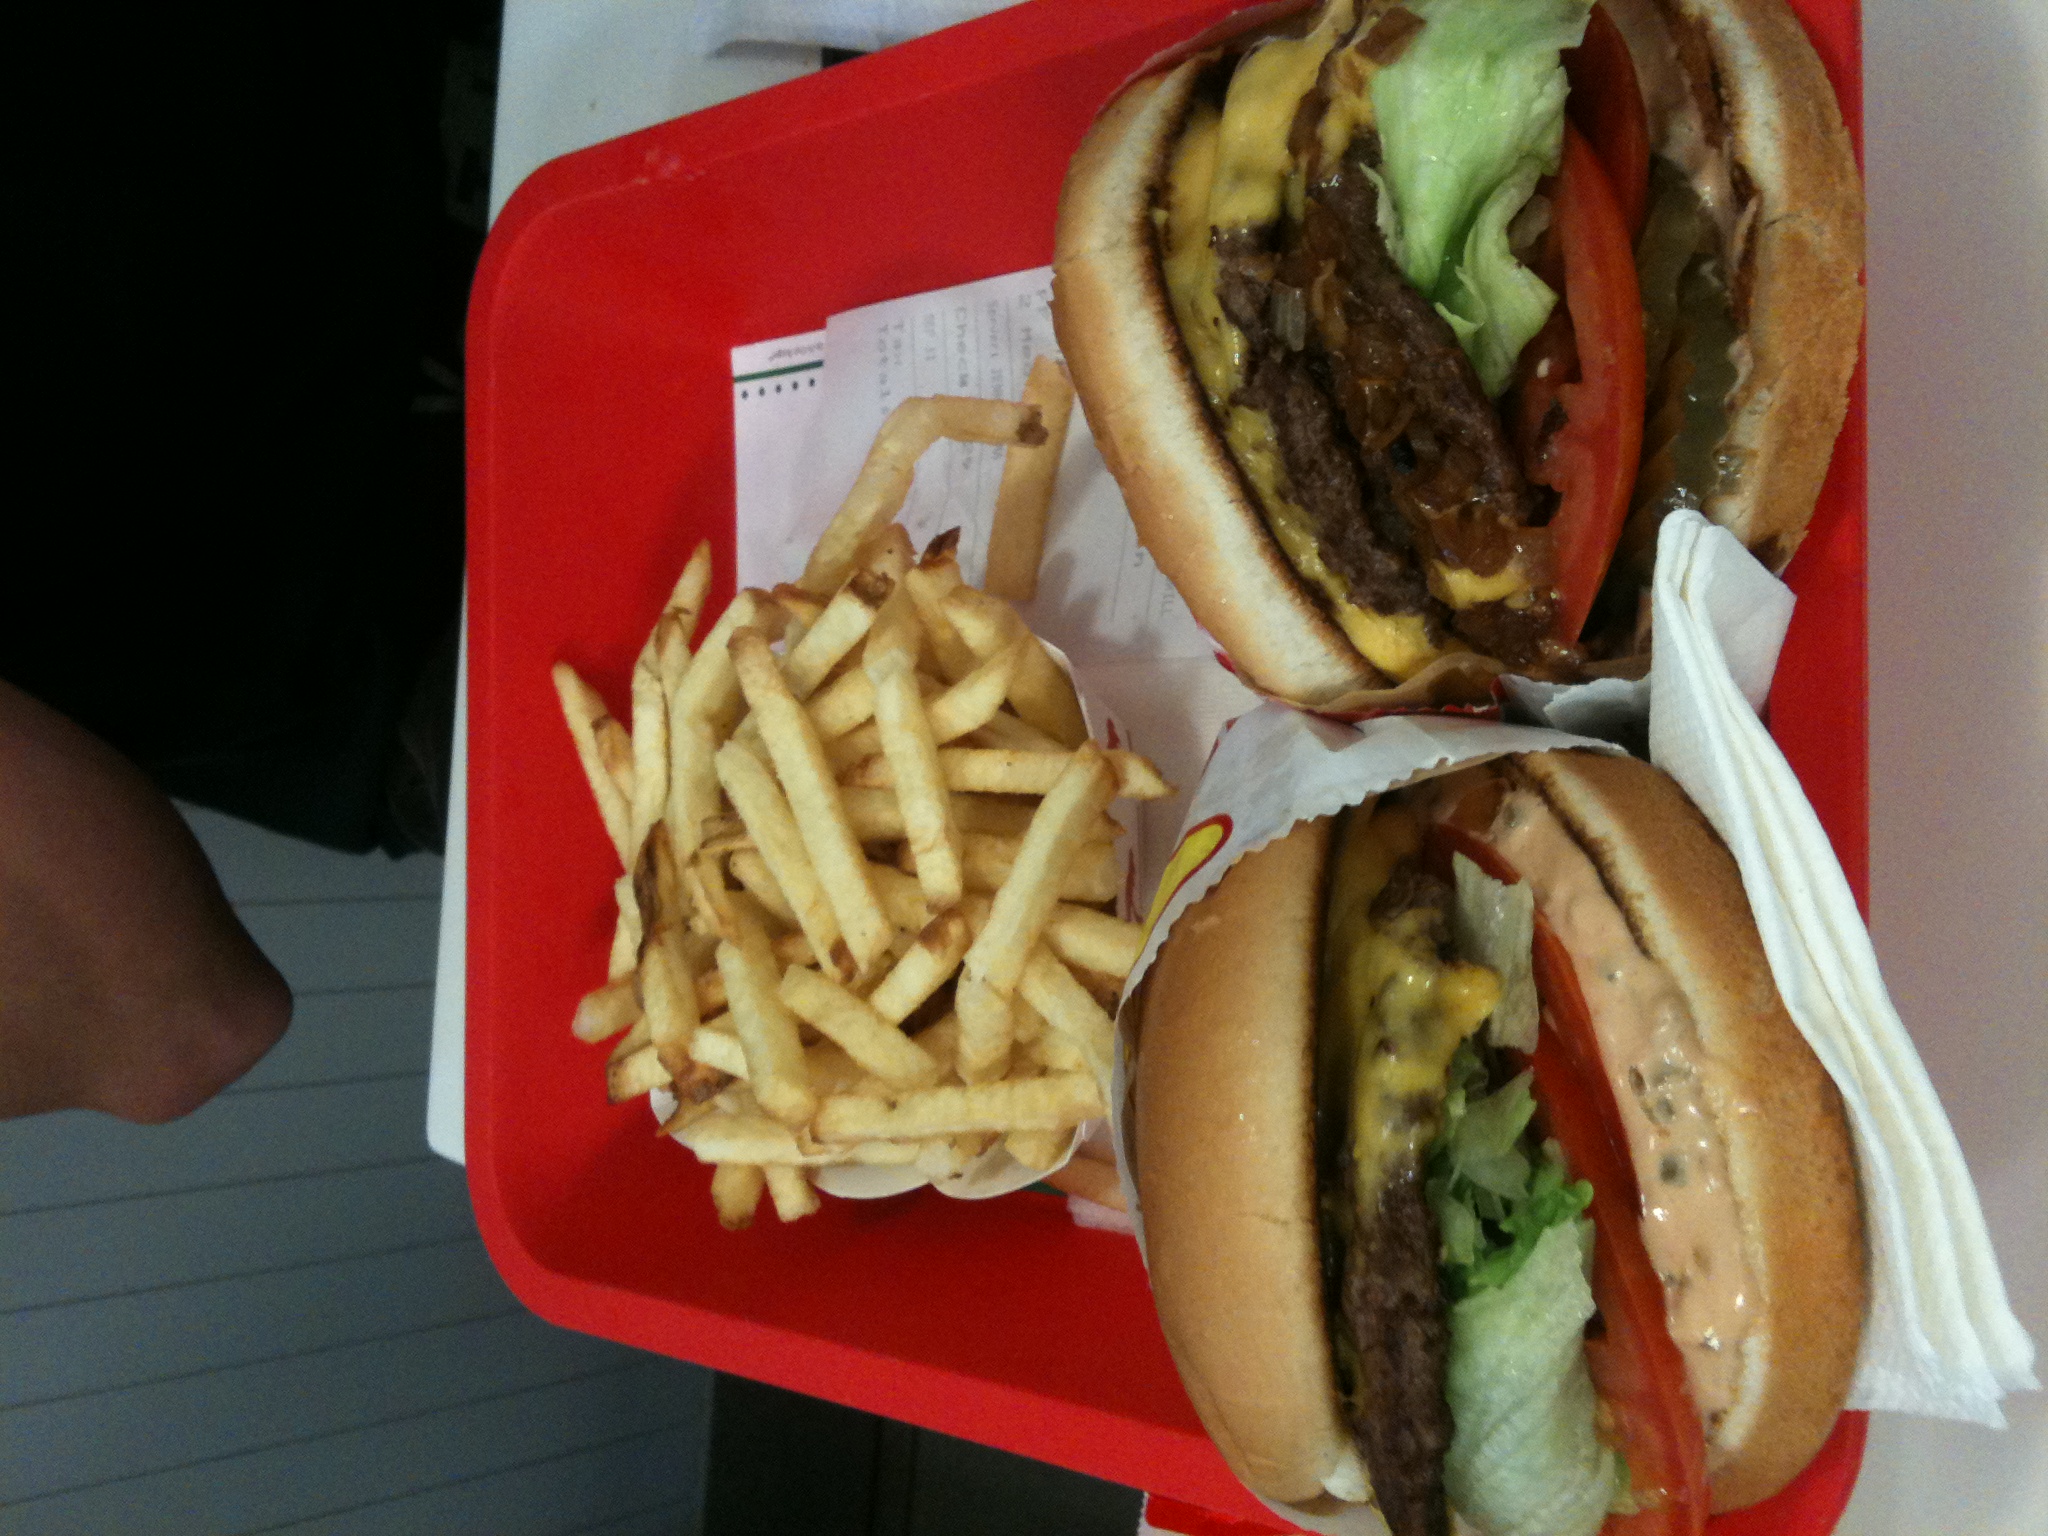 a red tray holds two hamburgers with fries on it